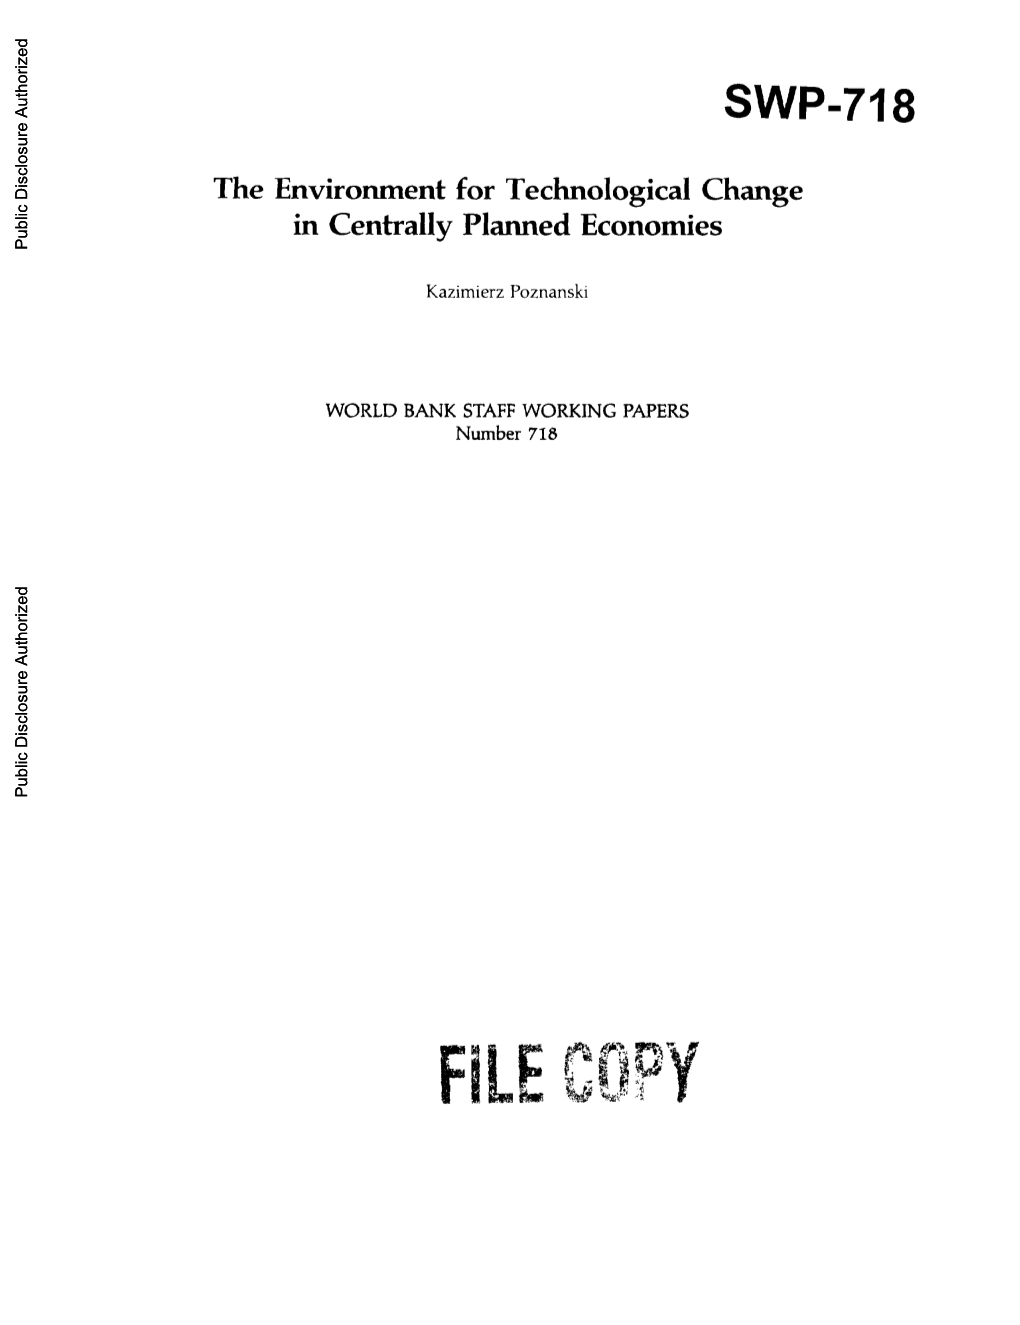 SWP-71 8 the Environment for Technological Change in Centrally